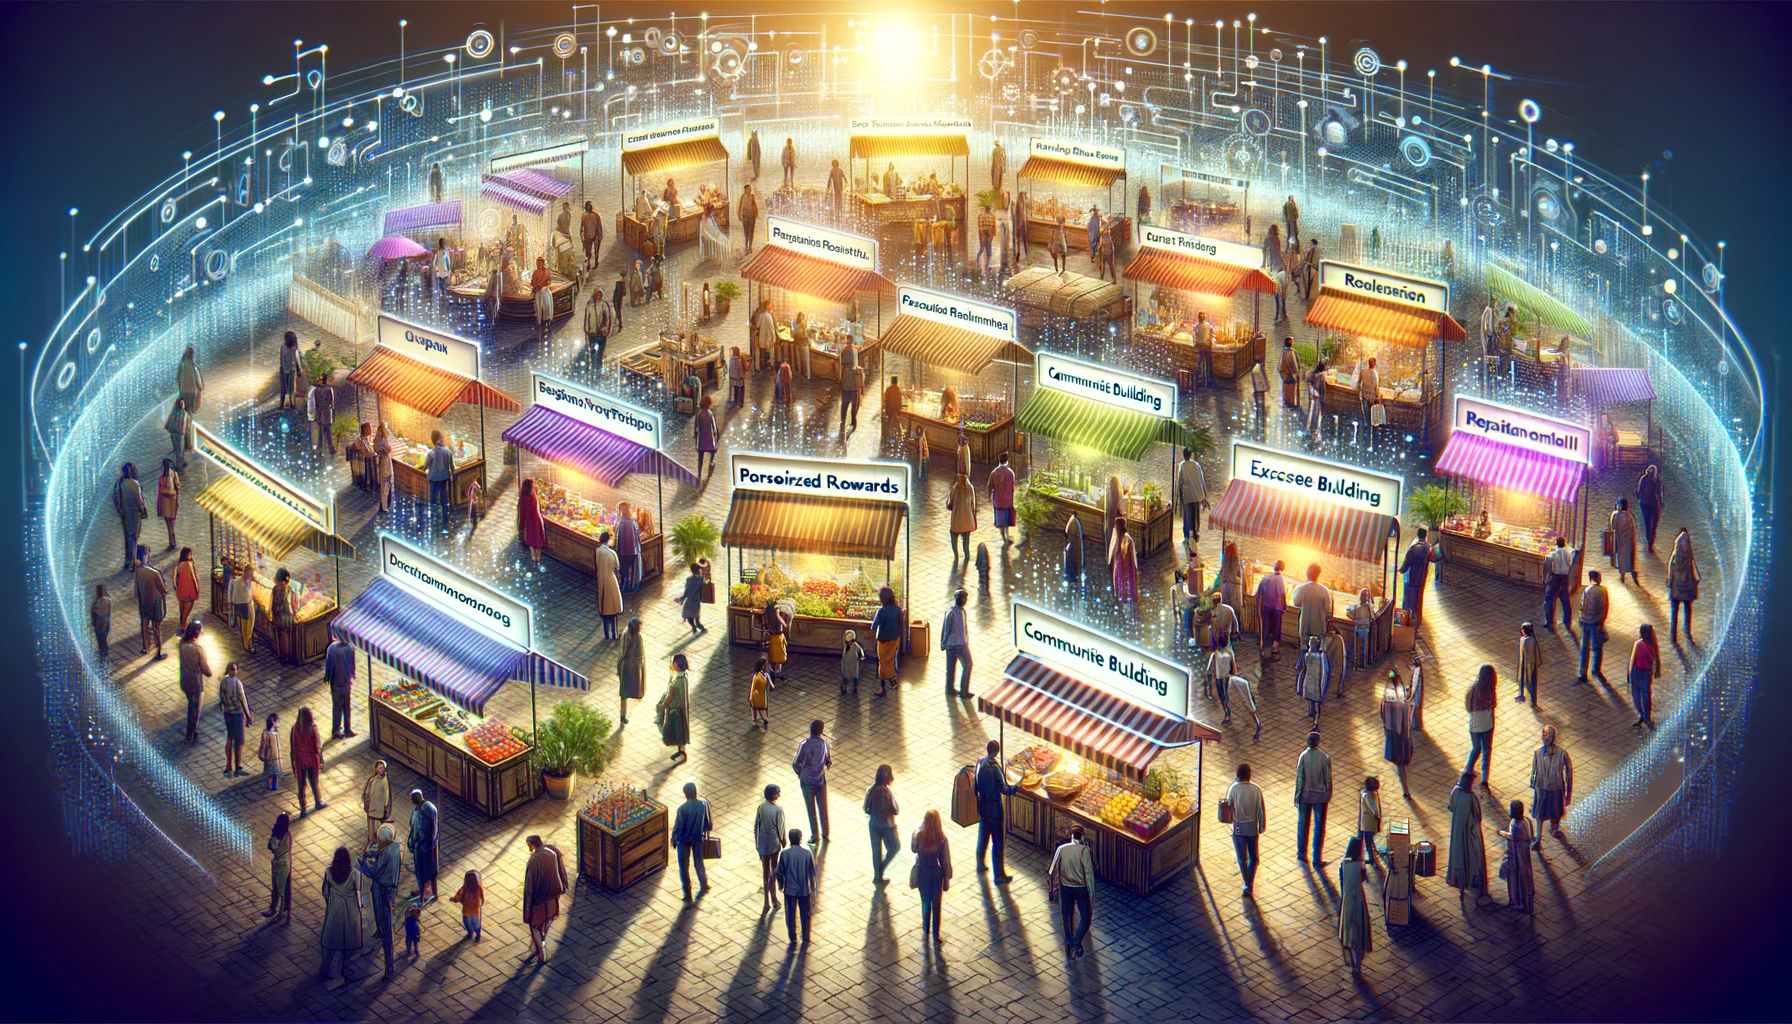 image of a bustling marketplace where each stall represents a different retention strategy. Customers are interacting with the vendors, exchanging stories, and sharing their experiences with others, symbolizing the vibrant exchange between brand and consumer that underpins successful retention strategies